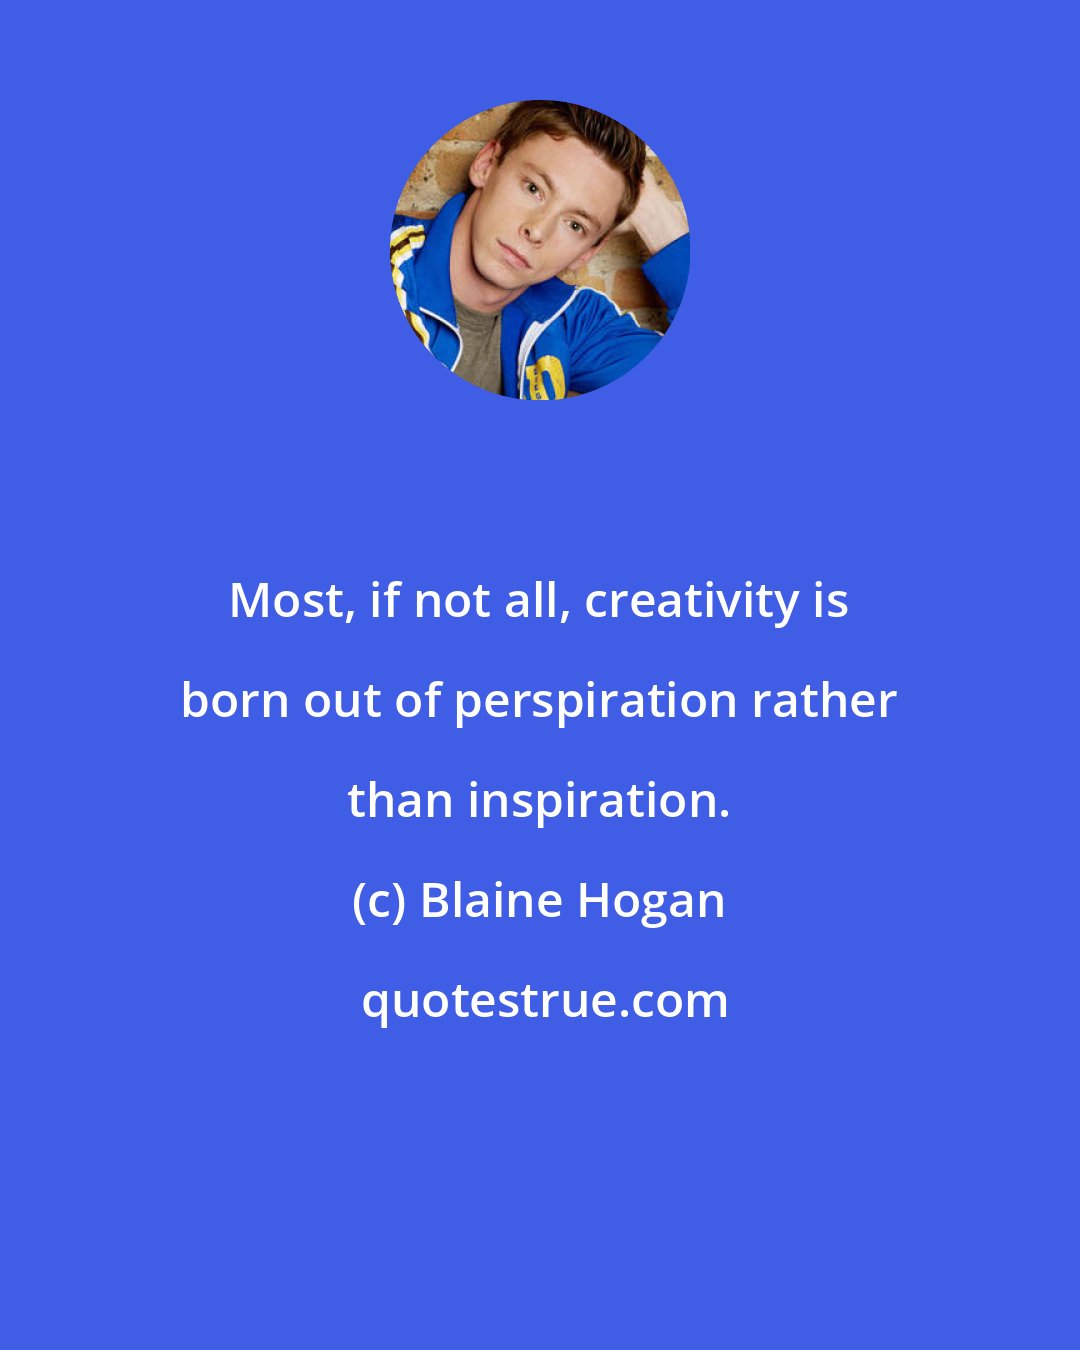 Blaine Hogan: Most, if not all, creativity is born out of perspiration rather than inspiration.